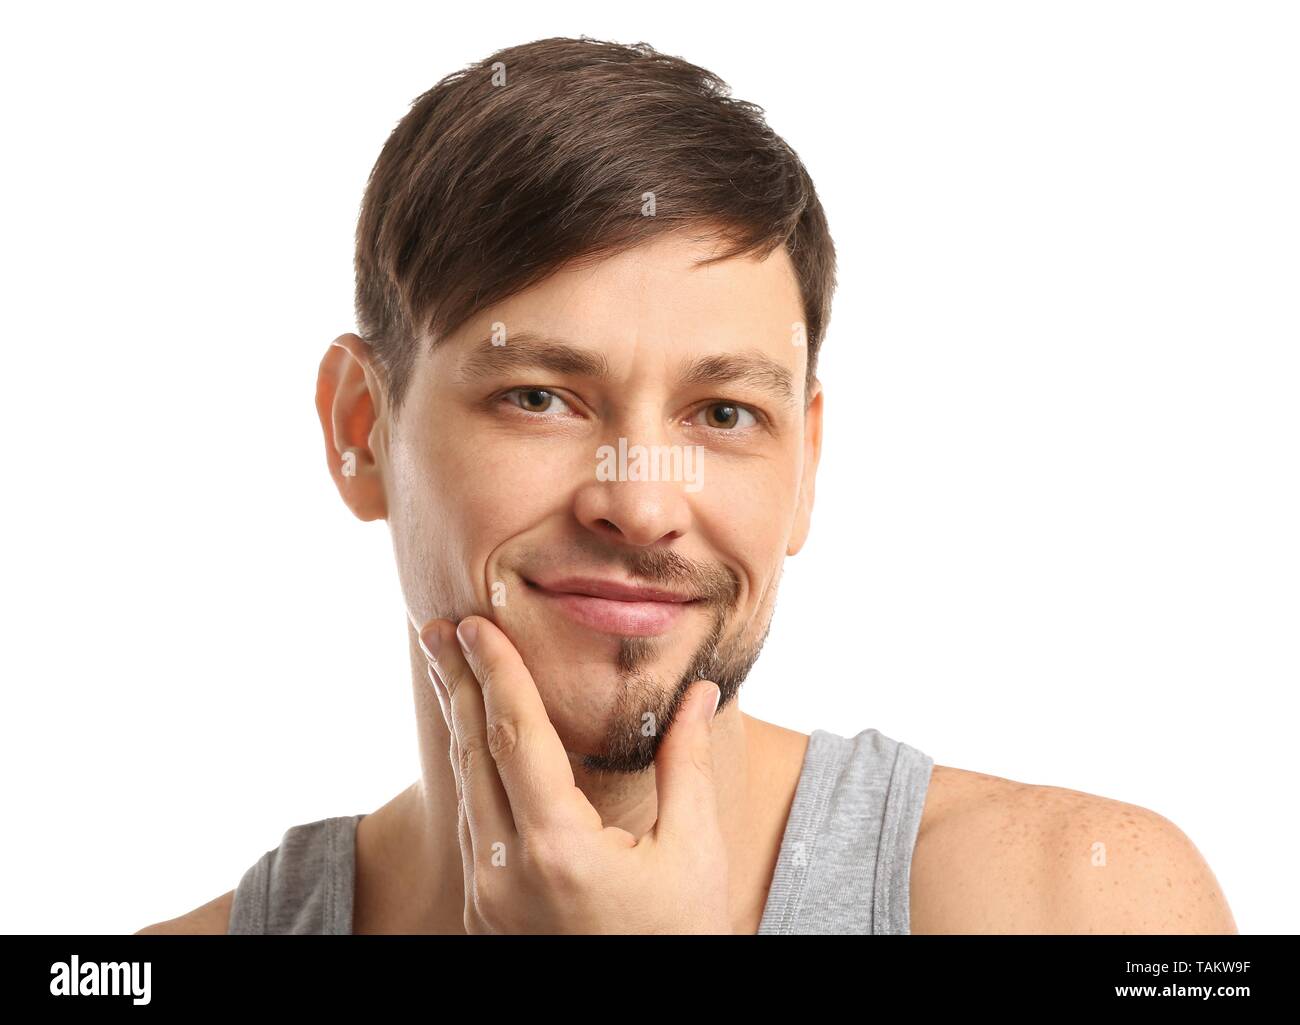 Handsome man having half of his face shaved against white background Stock Photo